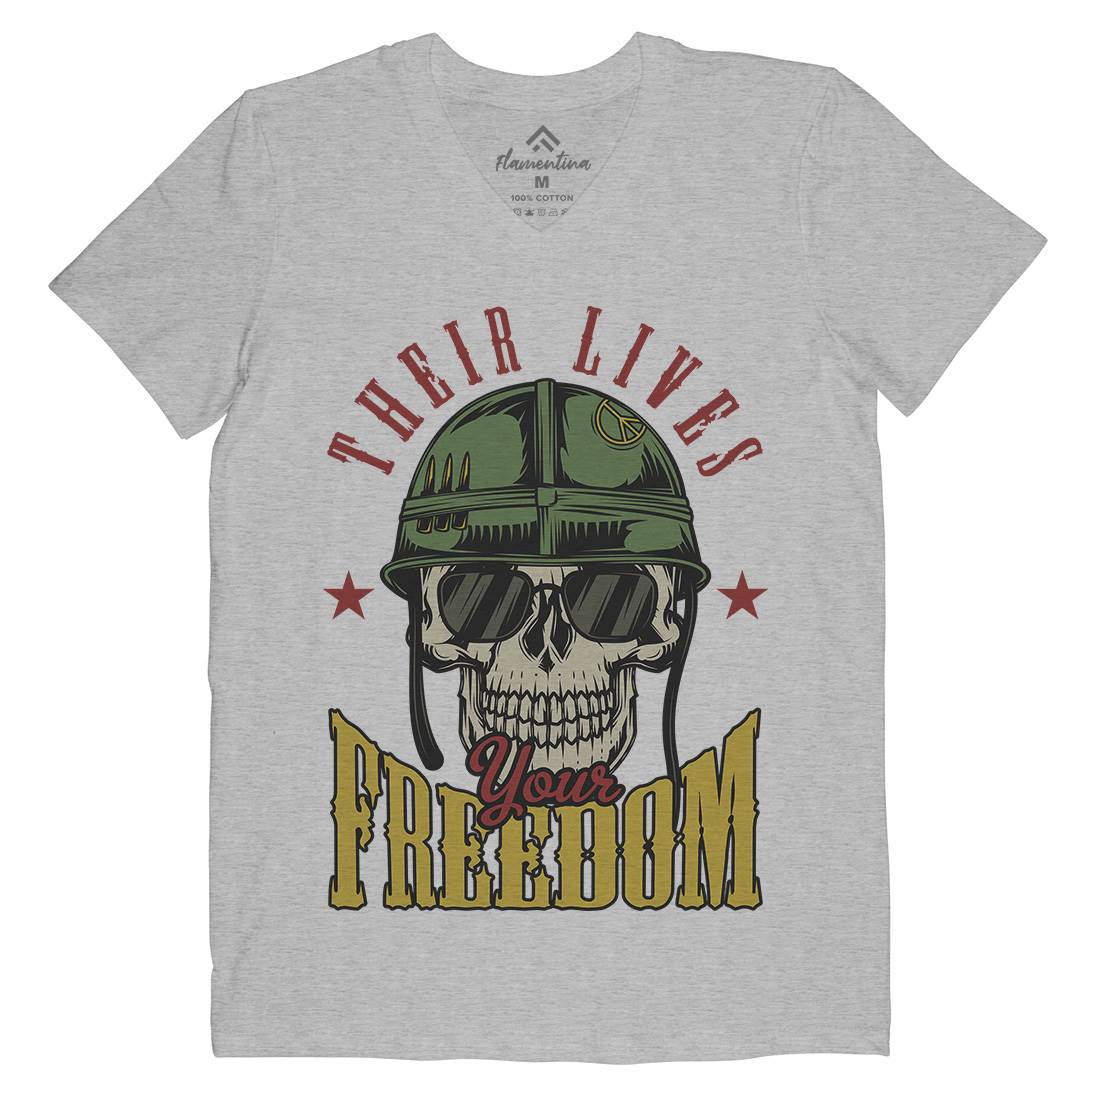 Your Freedom Mens V-Neck T-Shirt Army C899